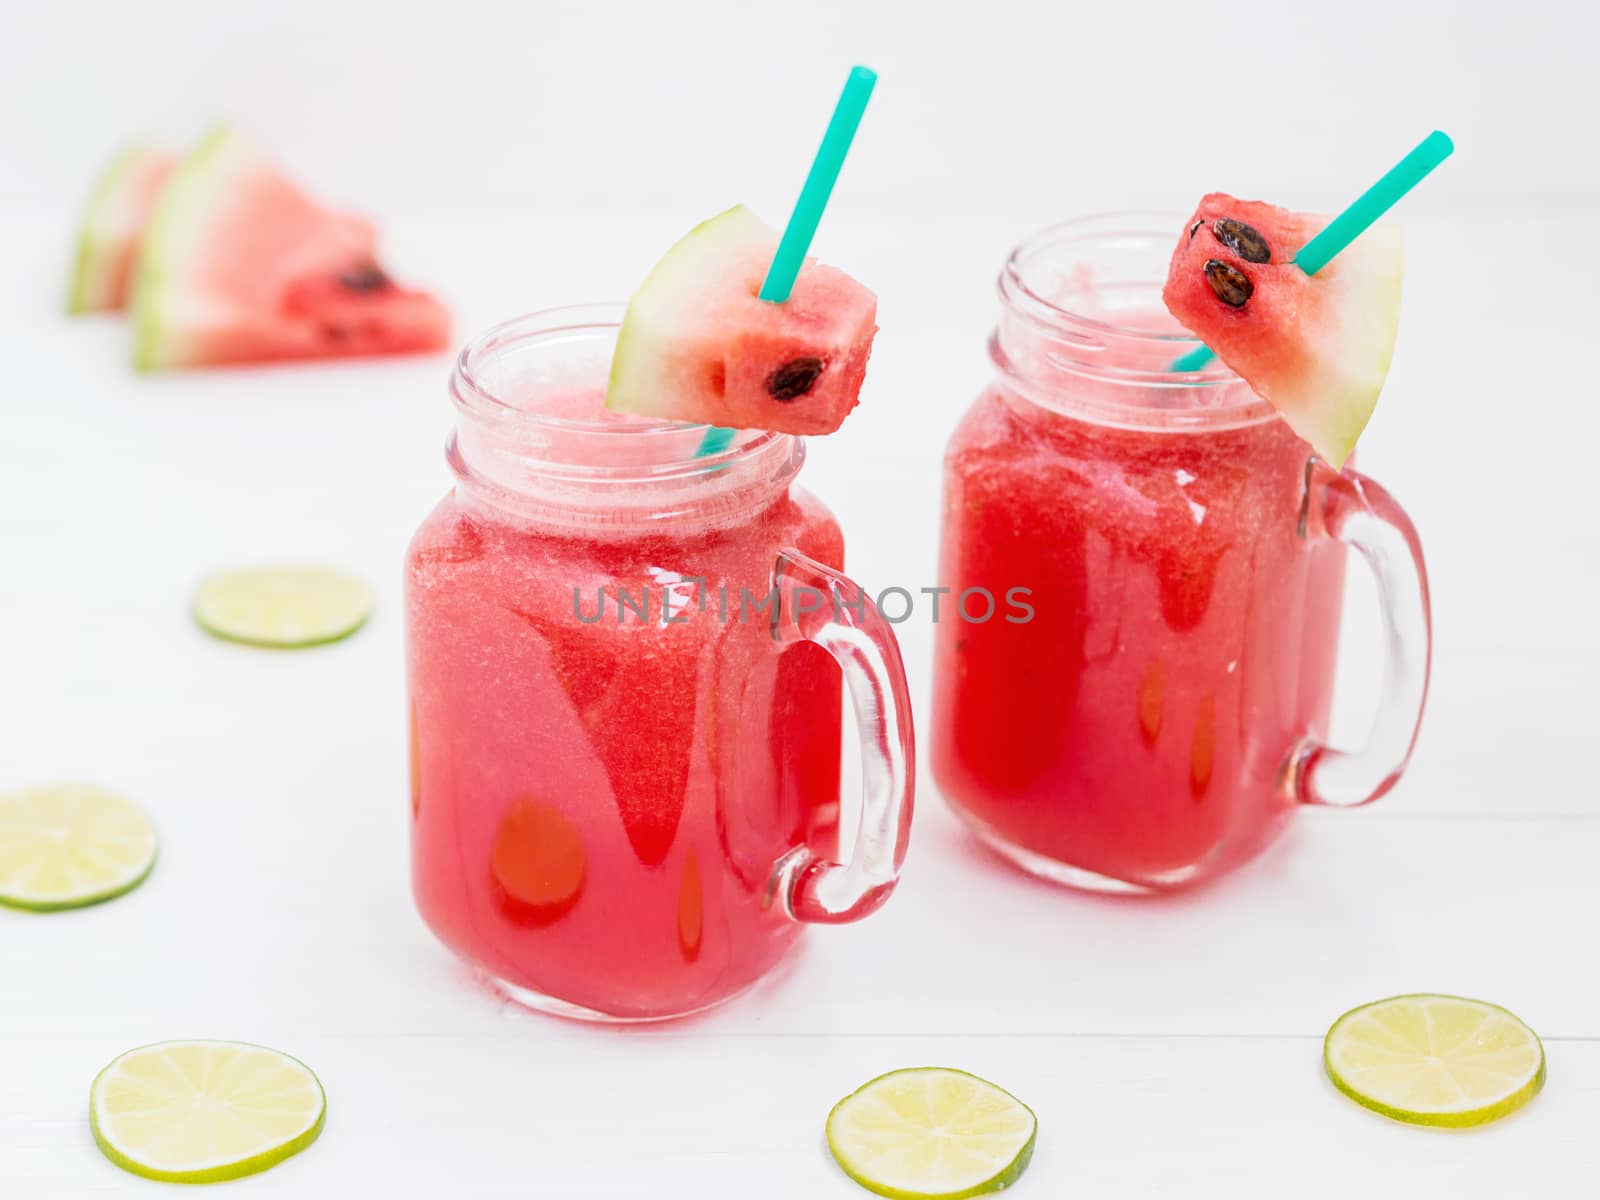 Watermelon smothie and slices on white background by fascinadora